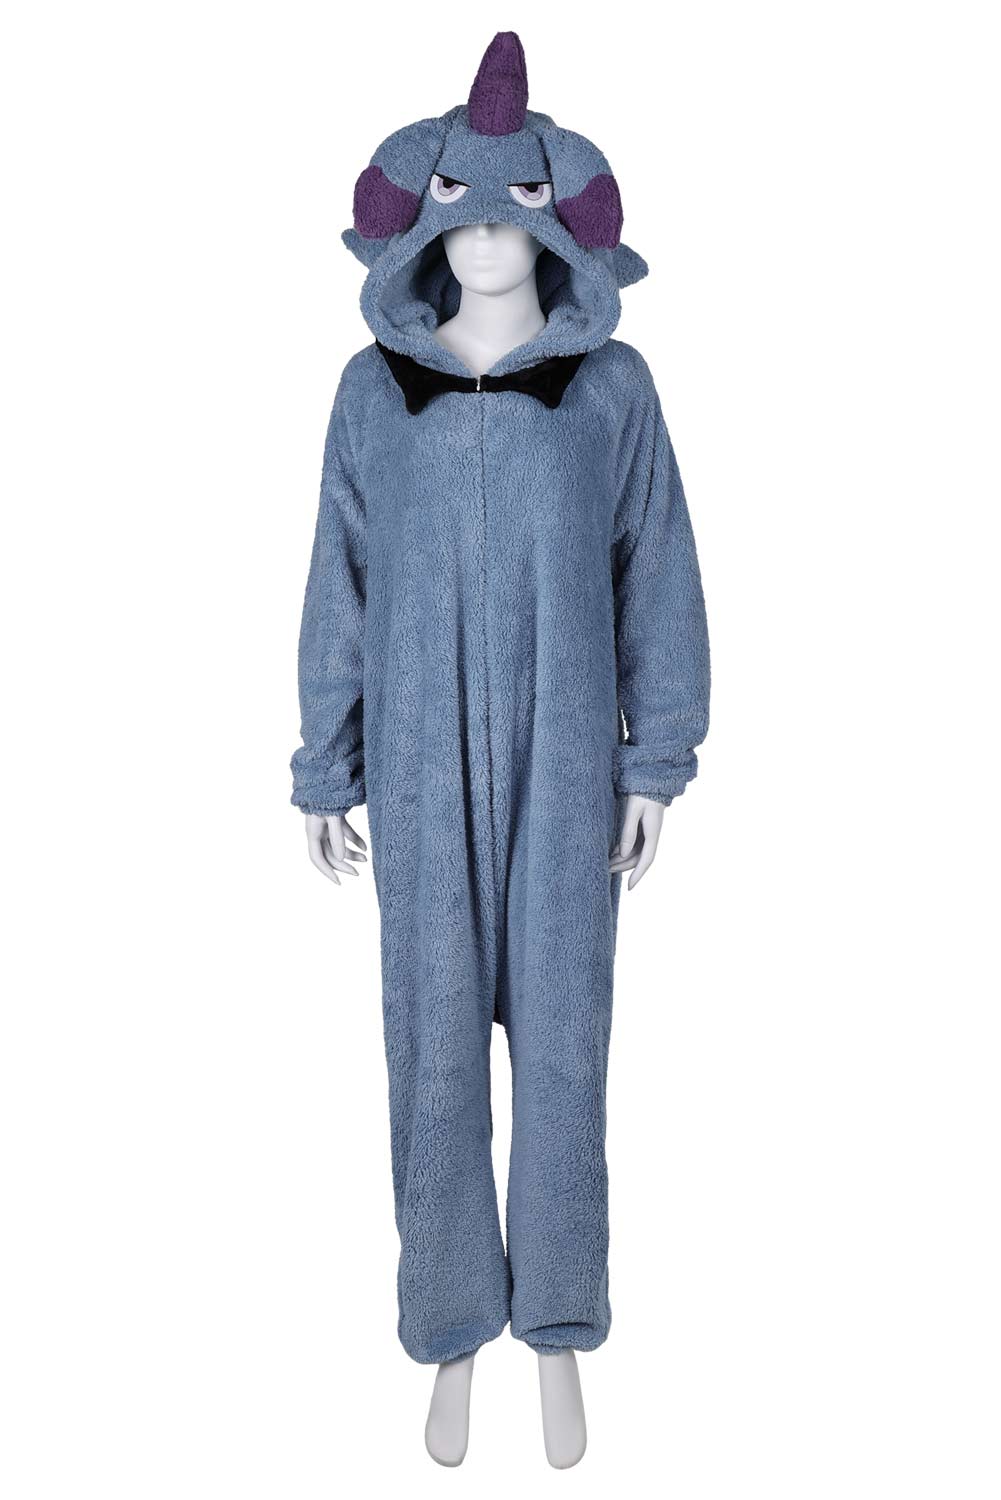 SeeCosplay Game Palworld Depresso Plush One-piece Fuzzy Pajamas Jumpsuit Outfits Halloween Carnival Suit Cosplay Costume